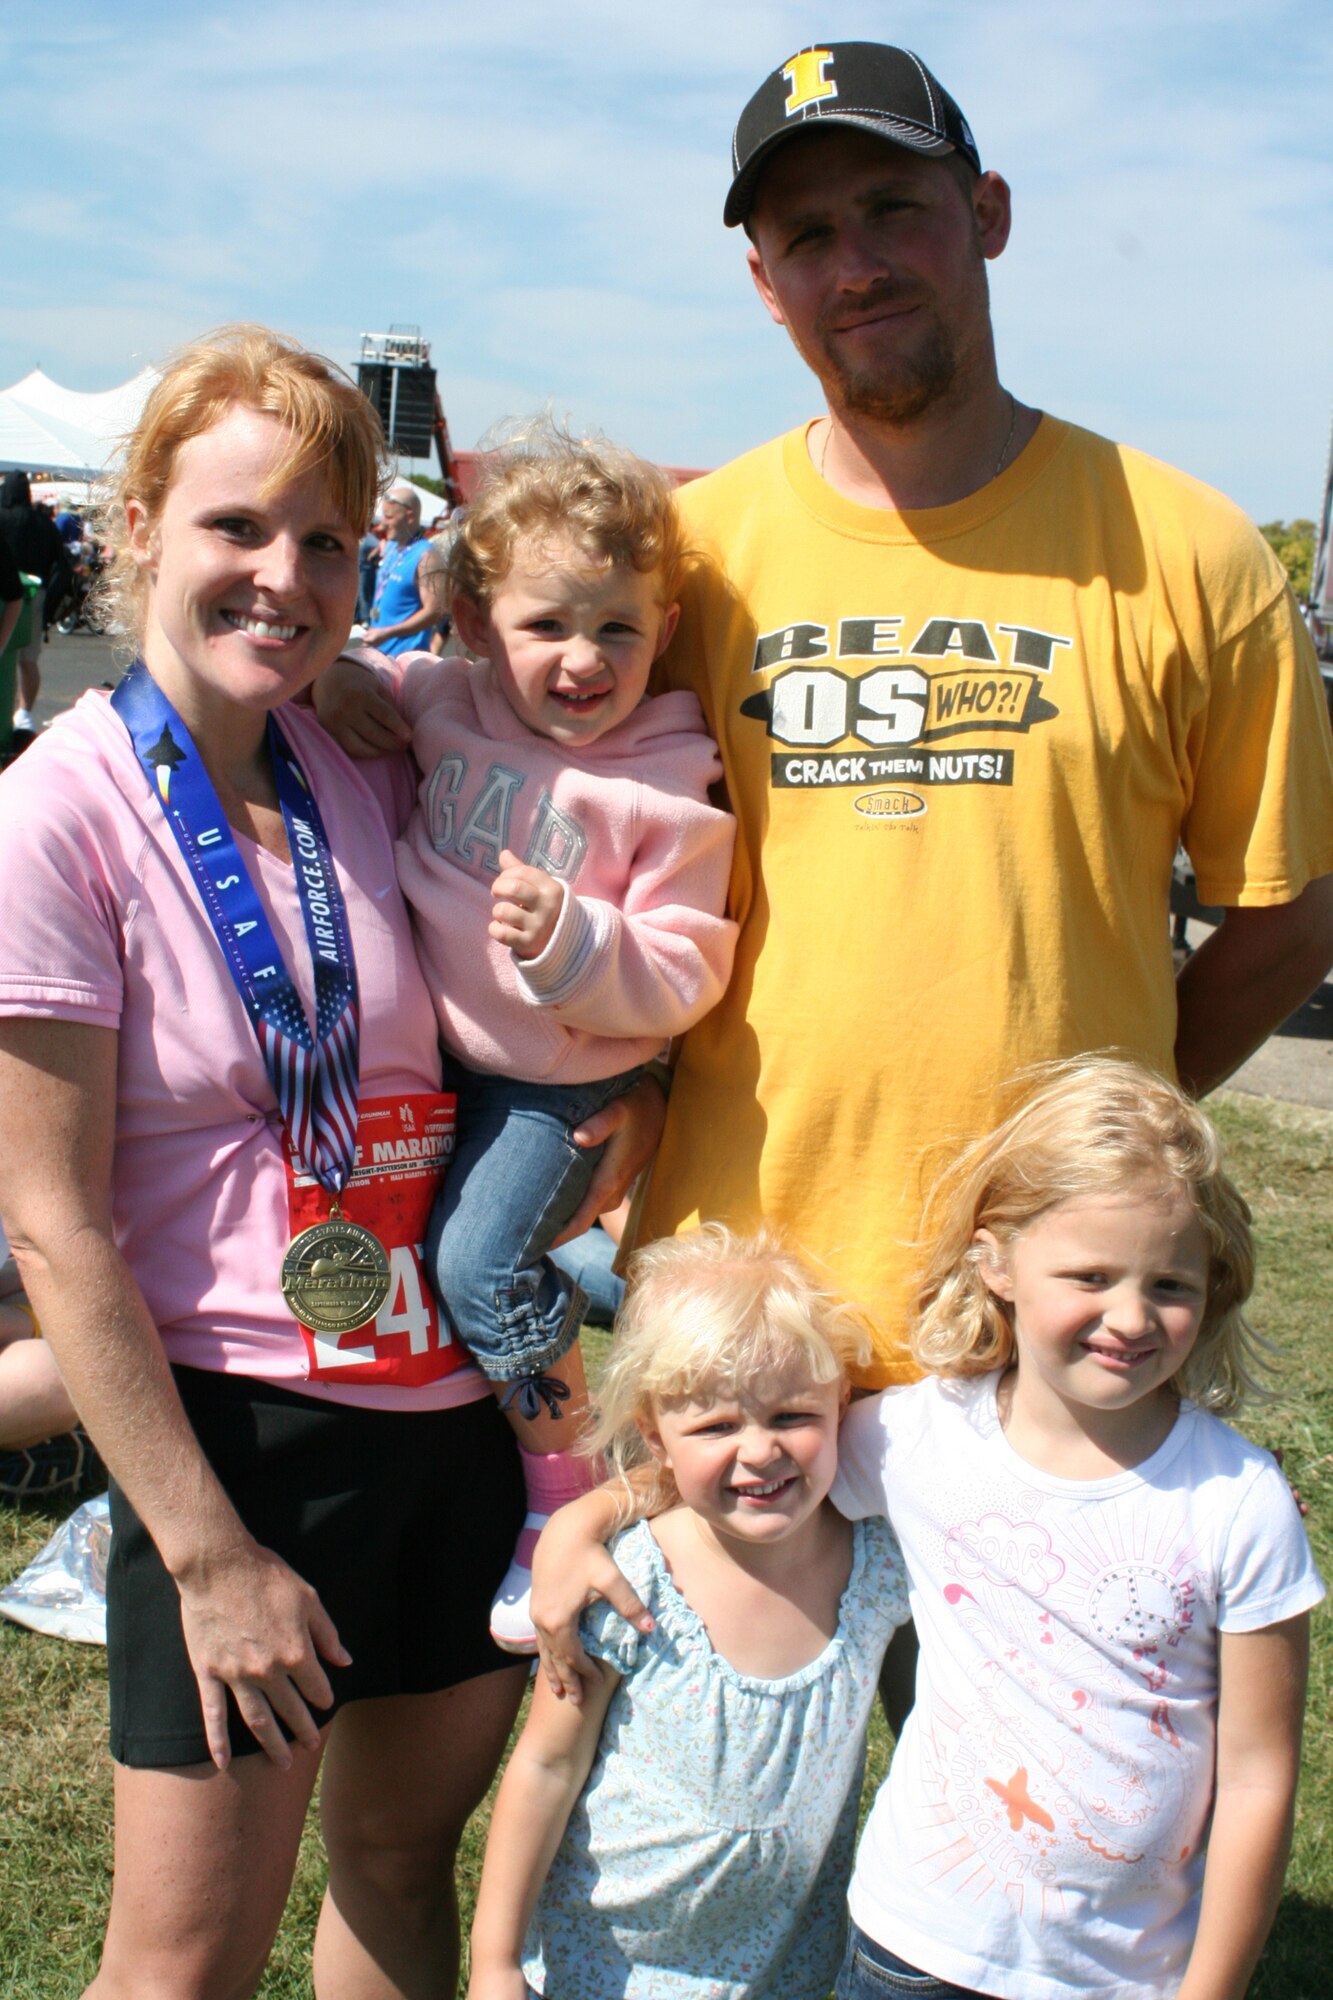 WRIGHT-PATTERSON AIR FORCE BASE, Ohio - Master Sgt. Rebecca Spencer, 445th Logistics Readiness Squadron, celebrates with her husband, Craig, and three daughters, Lauren, Megan, and Brook, after completing the 2009 Air Force Marathon at Wright-Patterson Air Force Base, Ohio, Sept. 19. Sergeant Spencer beat her previous marathon time by nearly four minutes coming in 143rd in female runners and 25th for her age group.  (U. S. Air Force photo/Capt. Rodney McNany)